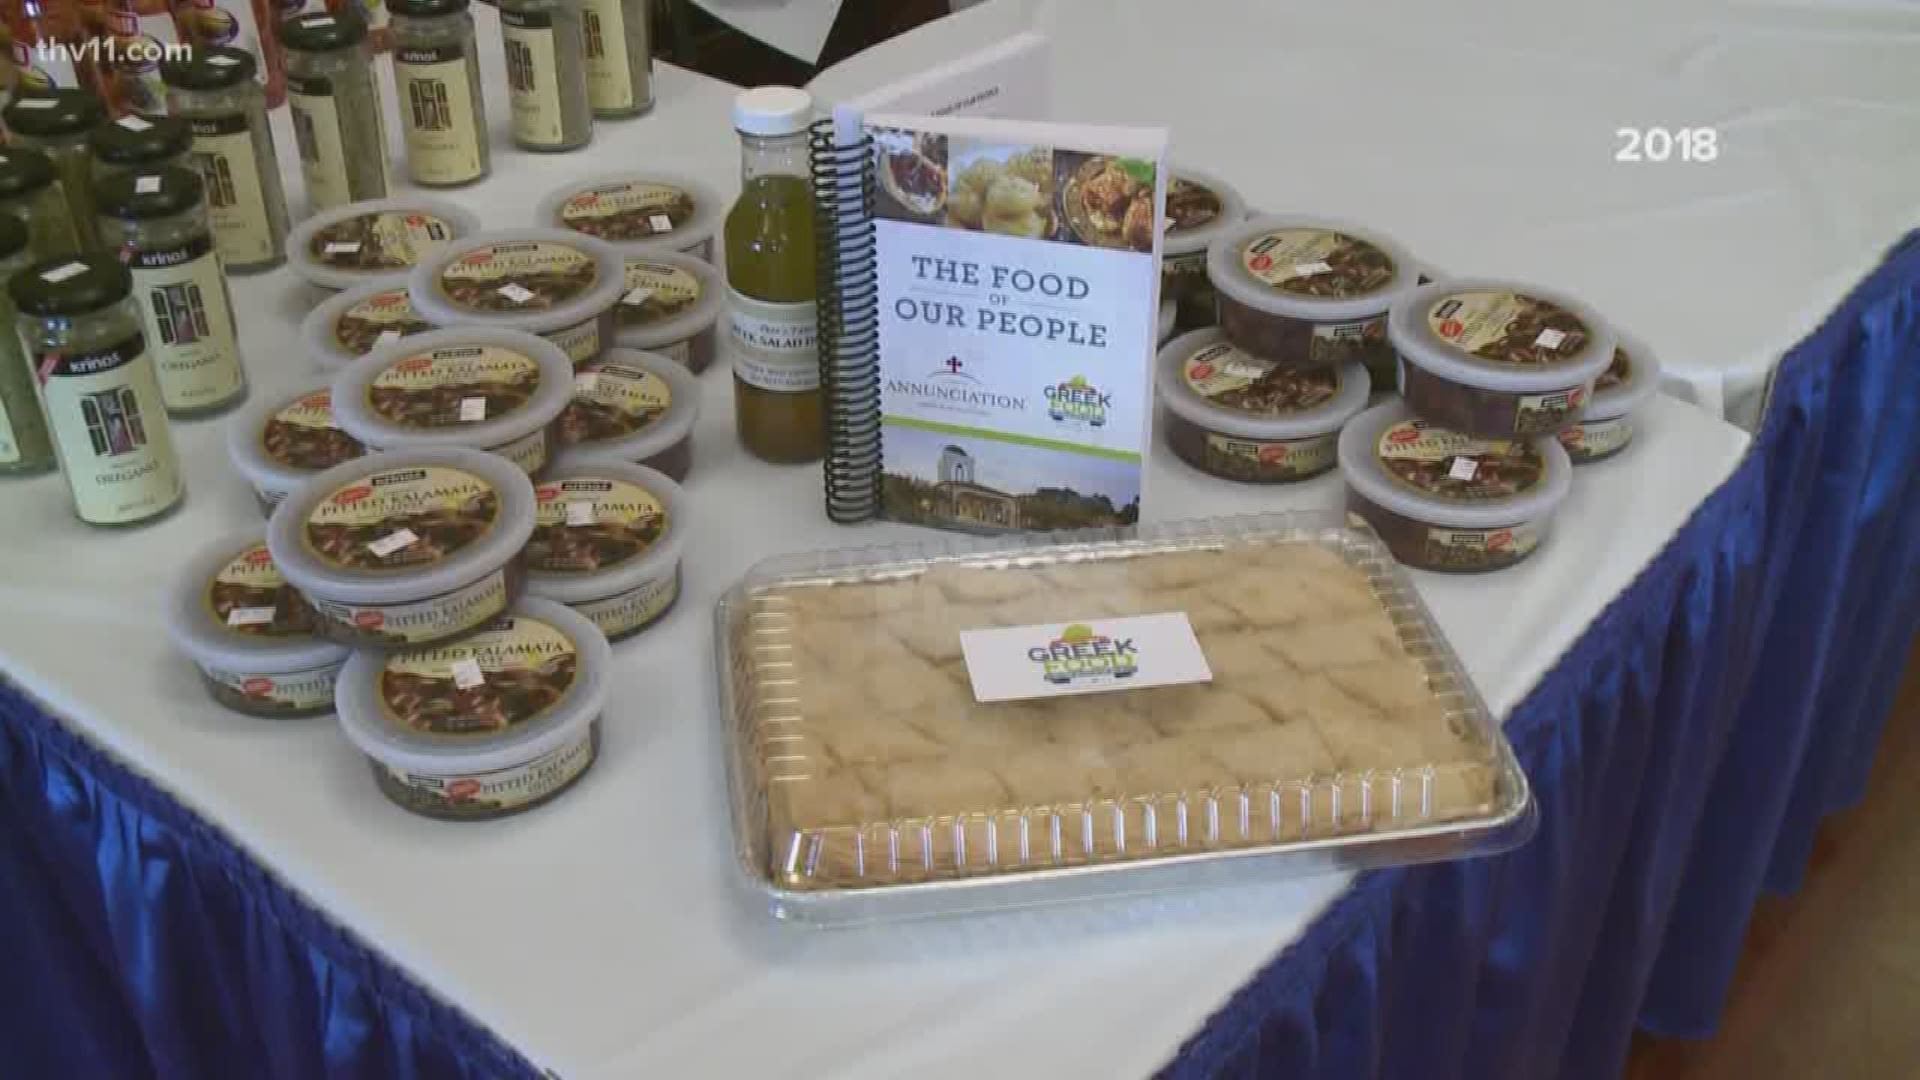 The International Greek Food Festival is today through Sunday, May 19 in Little Rock.